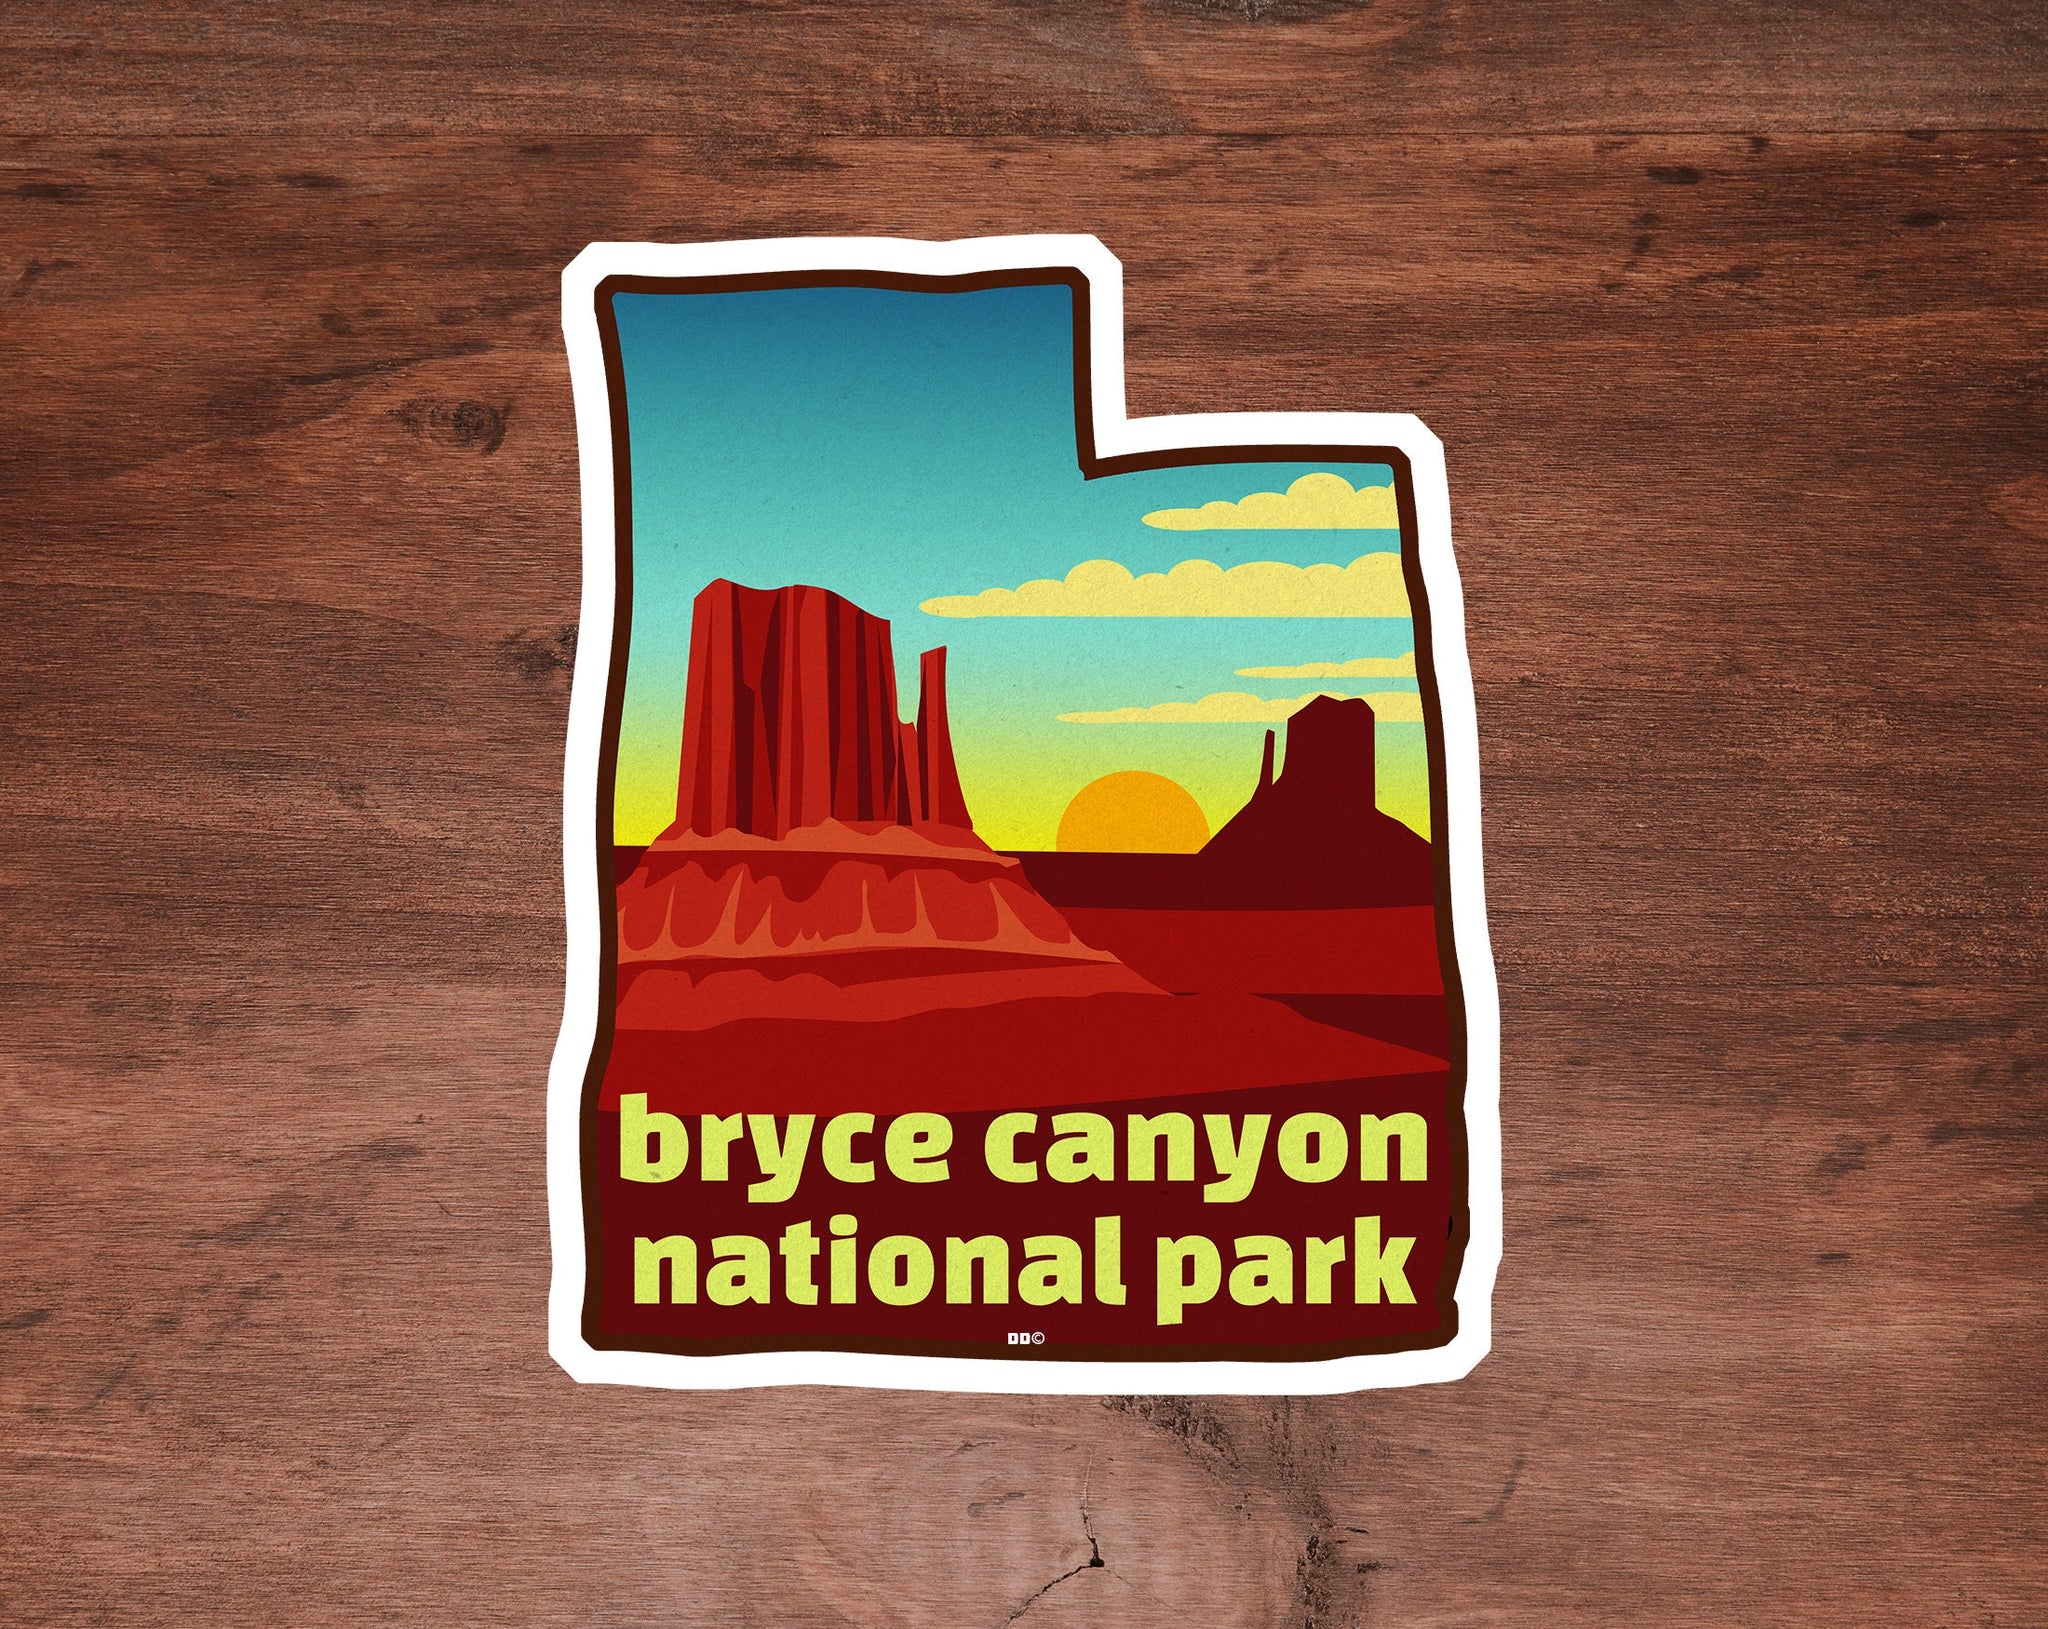 Bryce Canyon National Park Utah Sticker Decal 2.75" x 3.5"